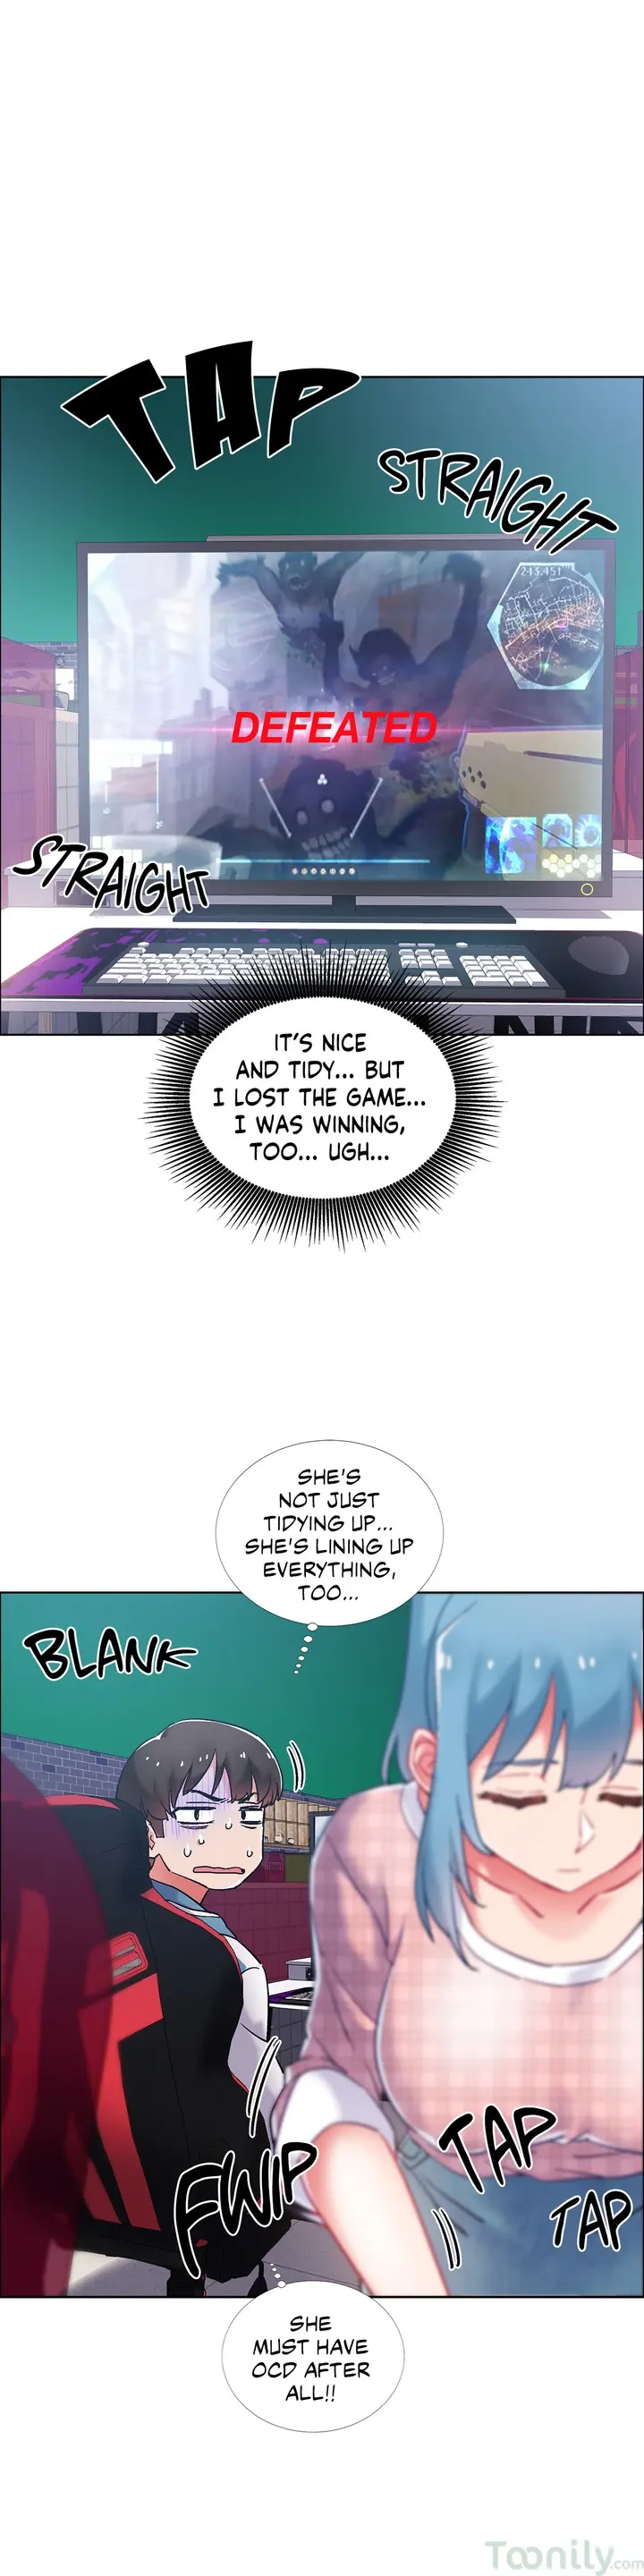 Rental Girls Chapter 34 - Page 20